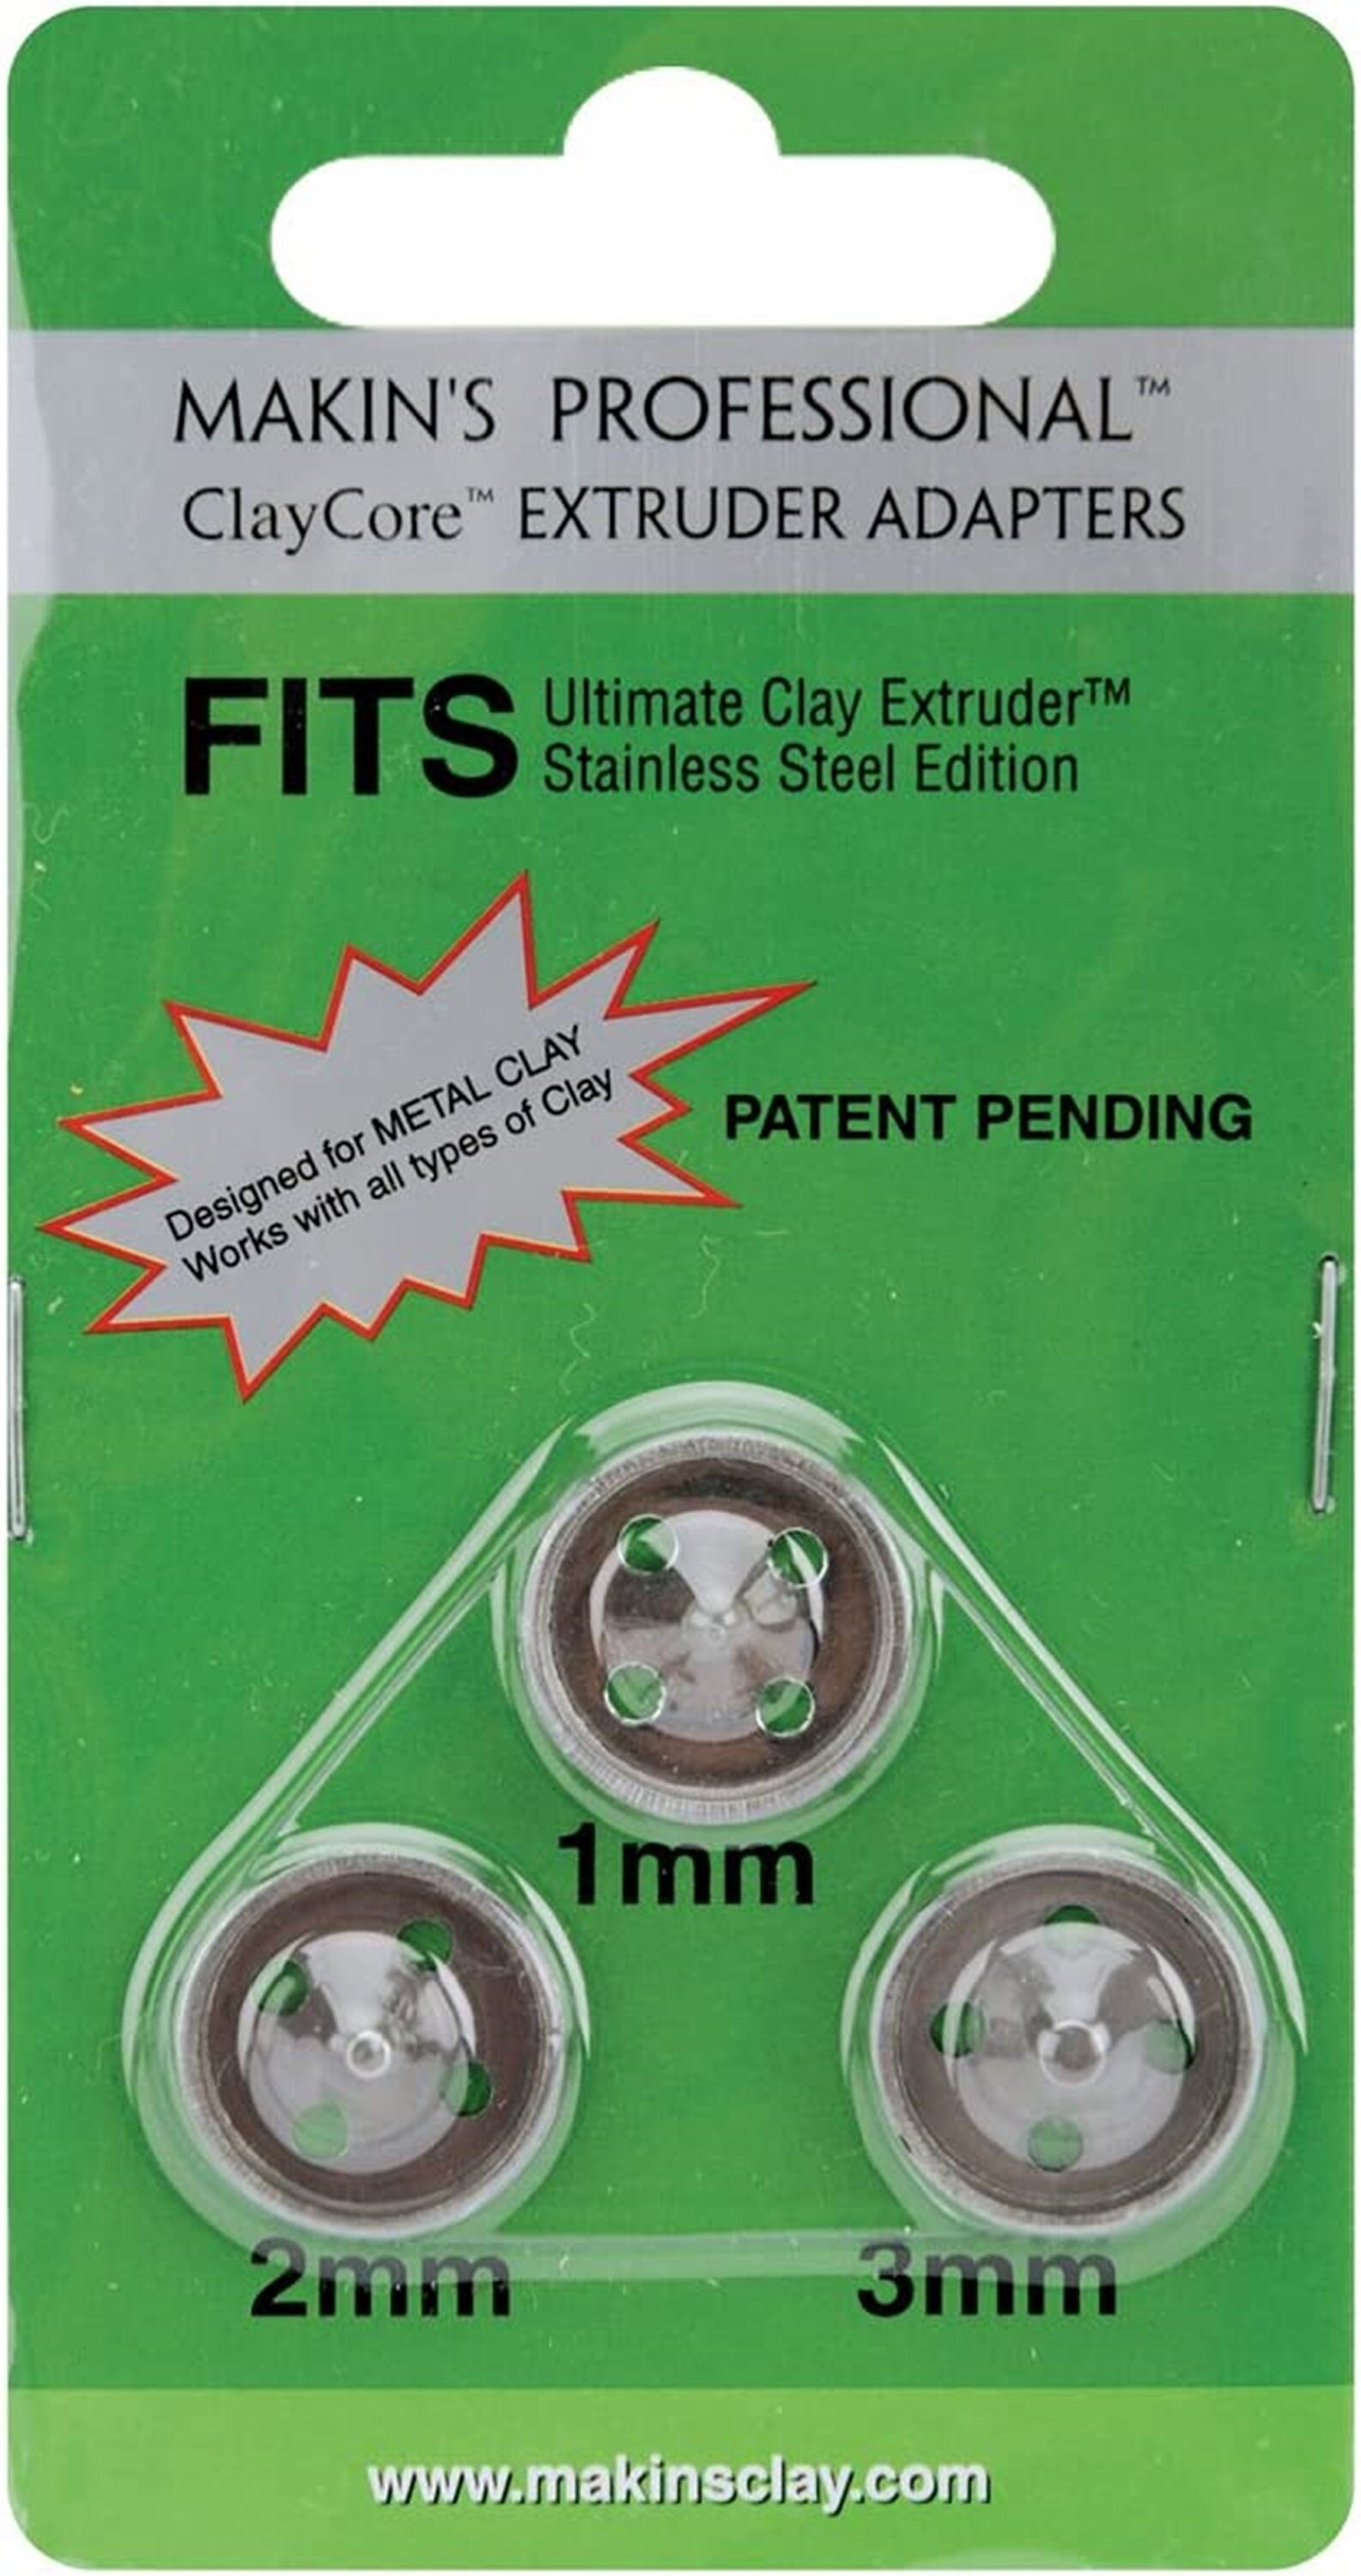 Makin's Professional Tools - Clay Extruder, extra disk sets, Clay